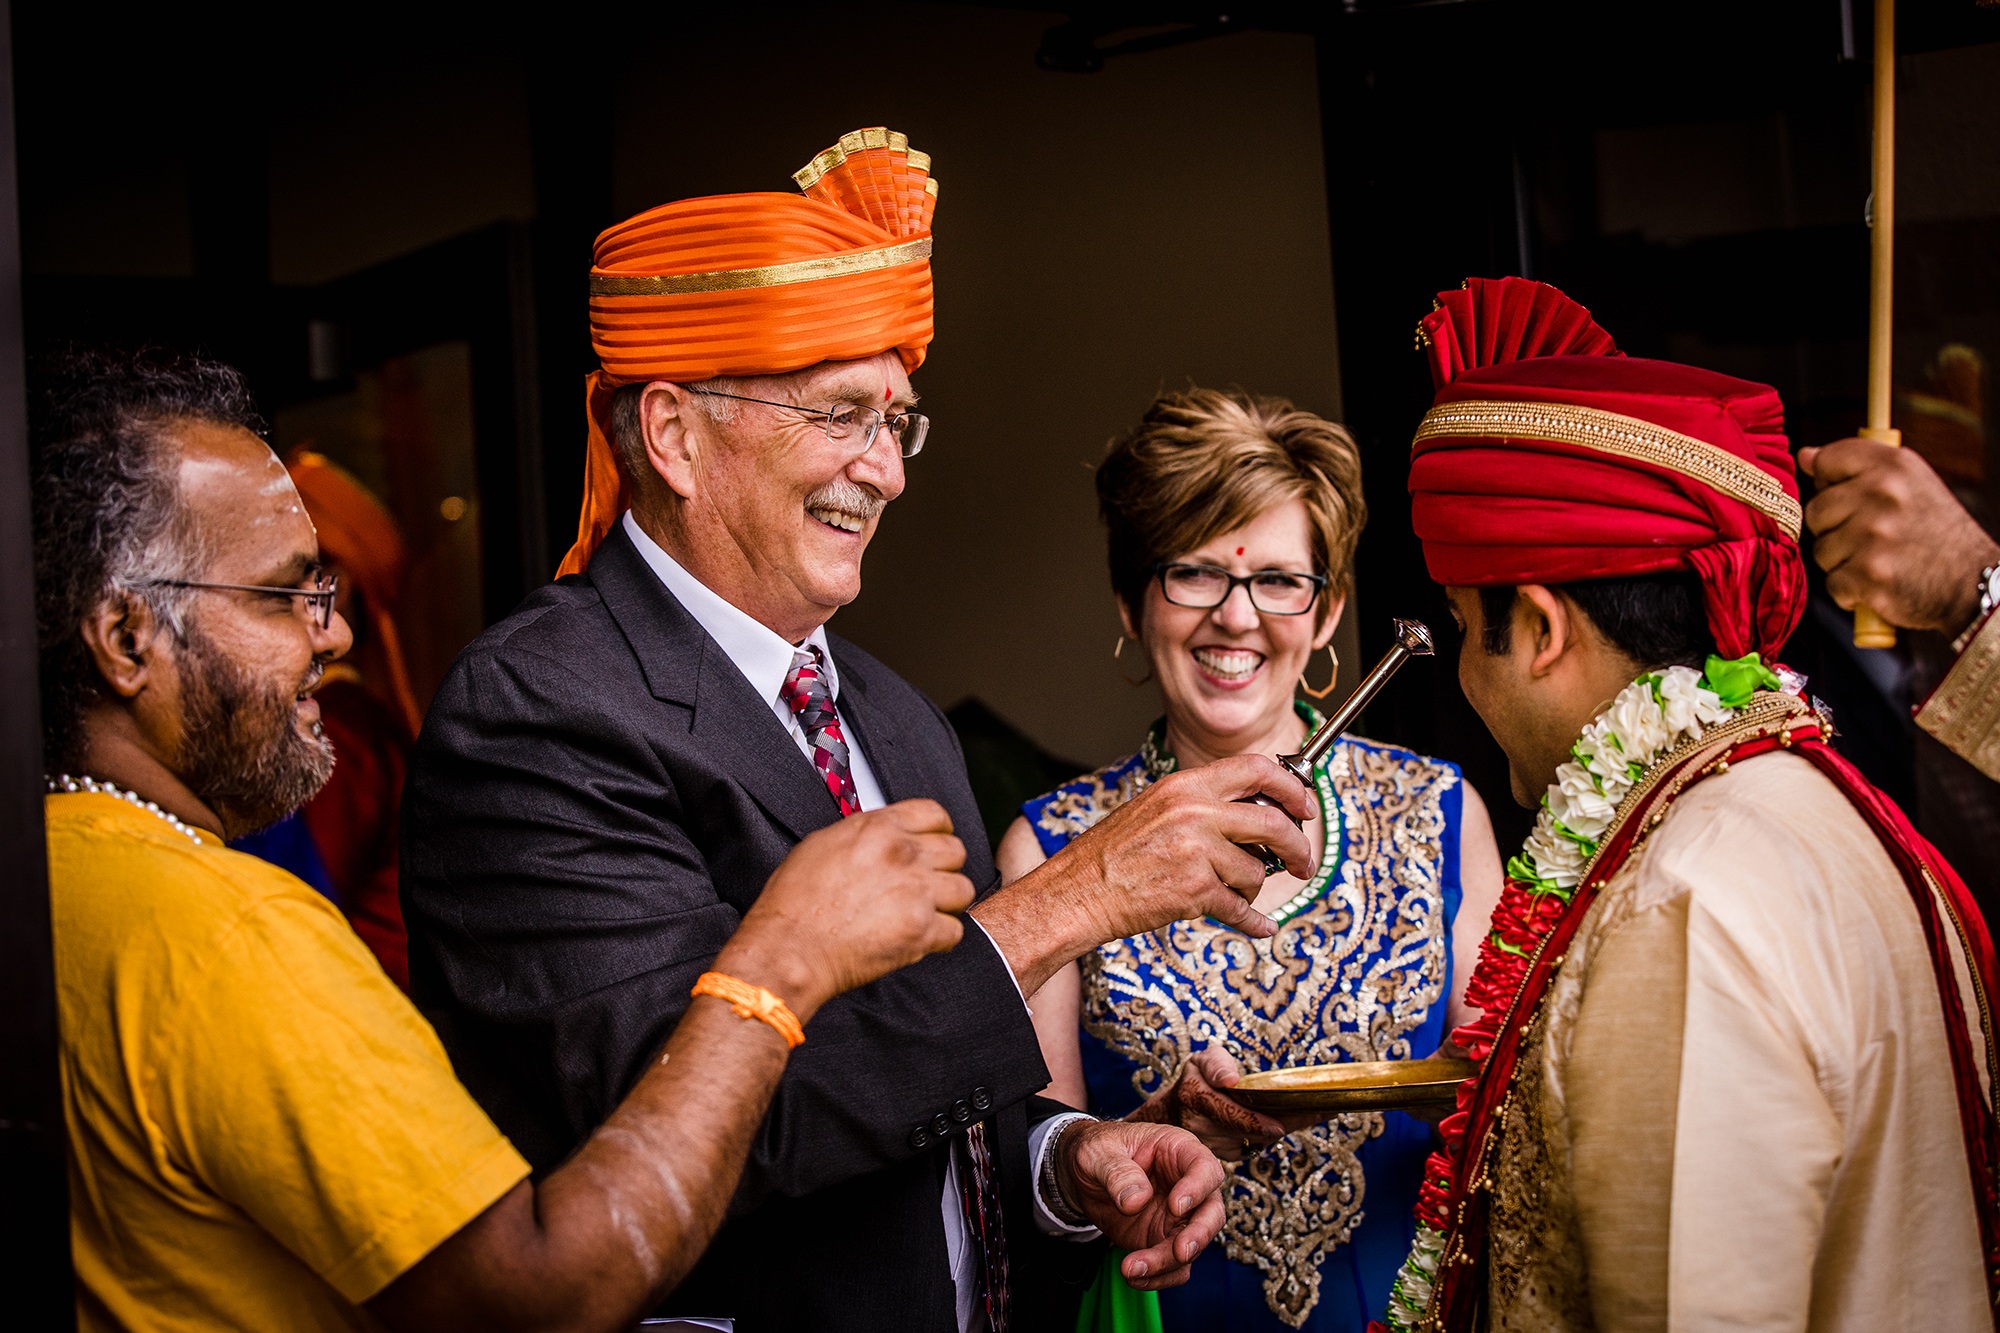 Parents offer gifts during an Aurora Balaji Temple wedding